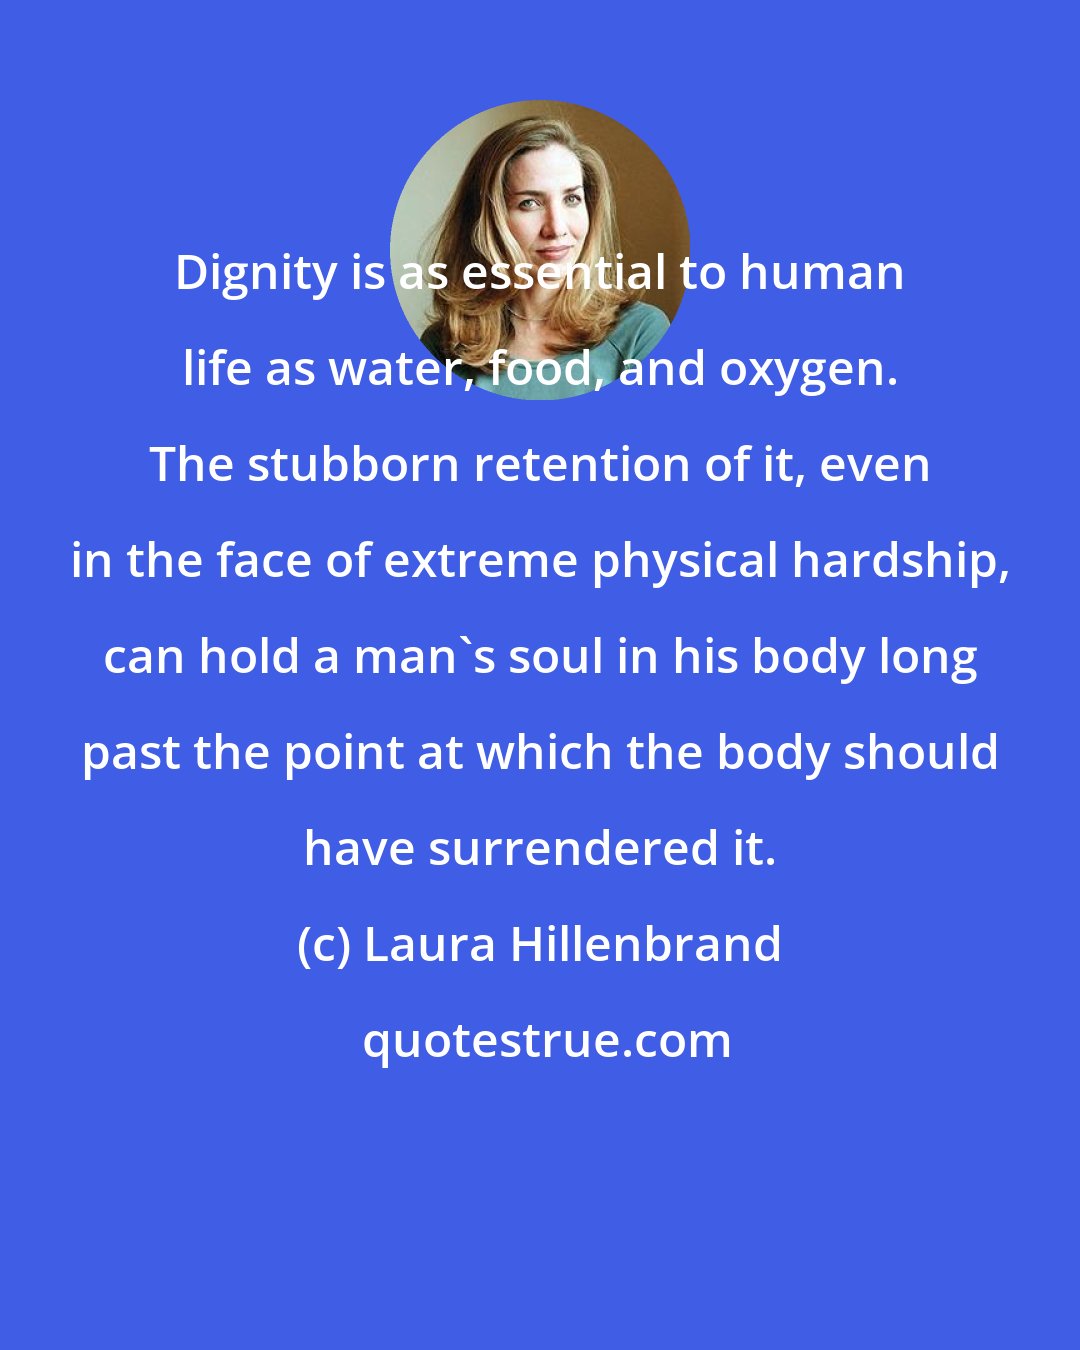 Laura Hillenbrand: Dignity is as essential to human life as water, food, and oxygen. The stubborn retention of it, even in the face of extreme physical hardship, can hold a man's soul in his body long past the point at which the body should have surrendered it.